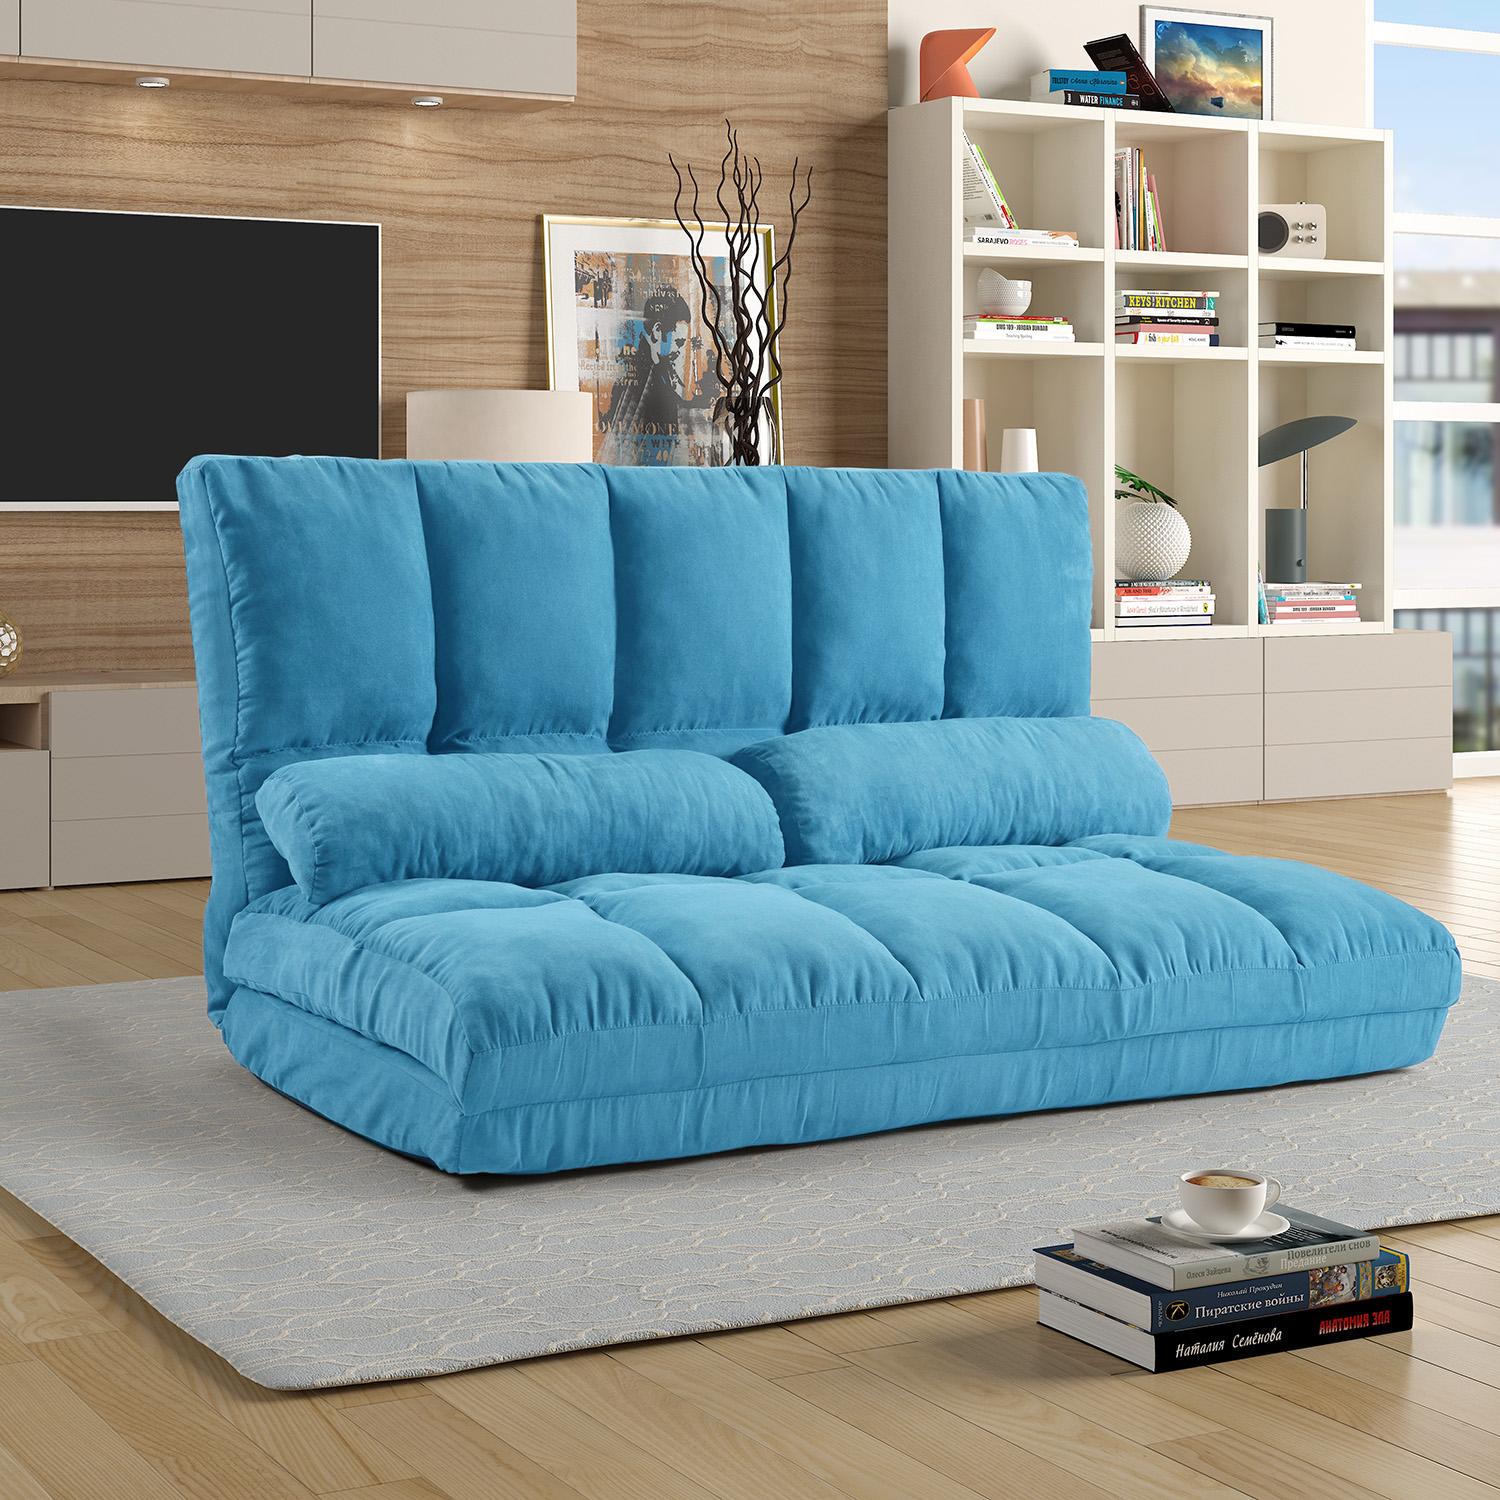 Fold Down Sofa Bed Lazy Sofa Floor Couch Adjustable Folding Modern Futon Chaise Video Gaming Lounge Convertible Upholstered Memory Foam Padded Cushion Guest Sleeper Chair with Two Pillows, Blue - image 1 of 7